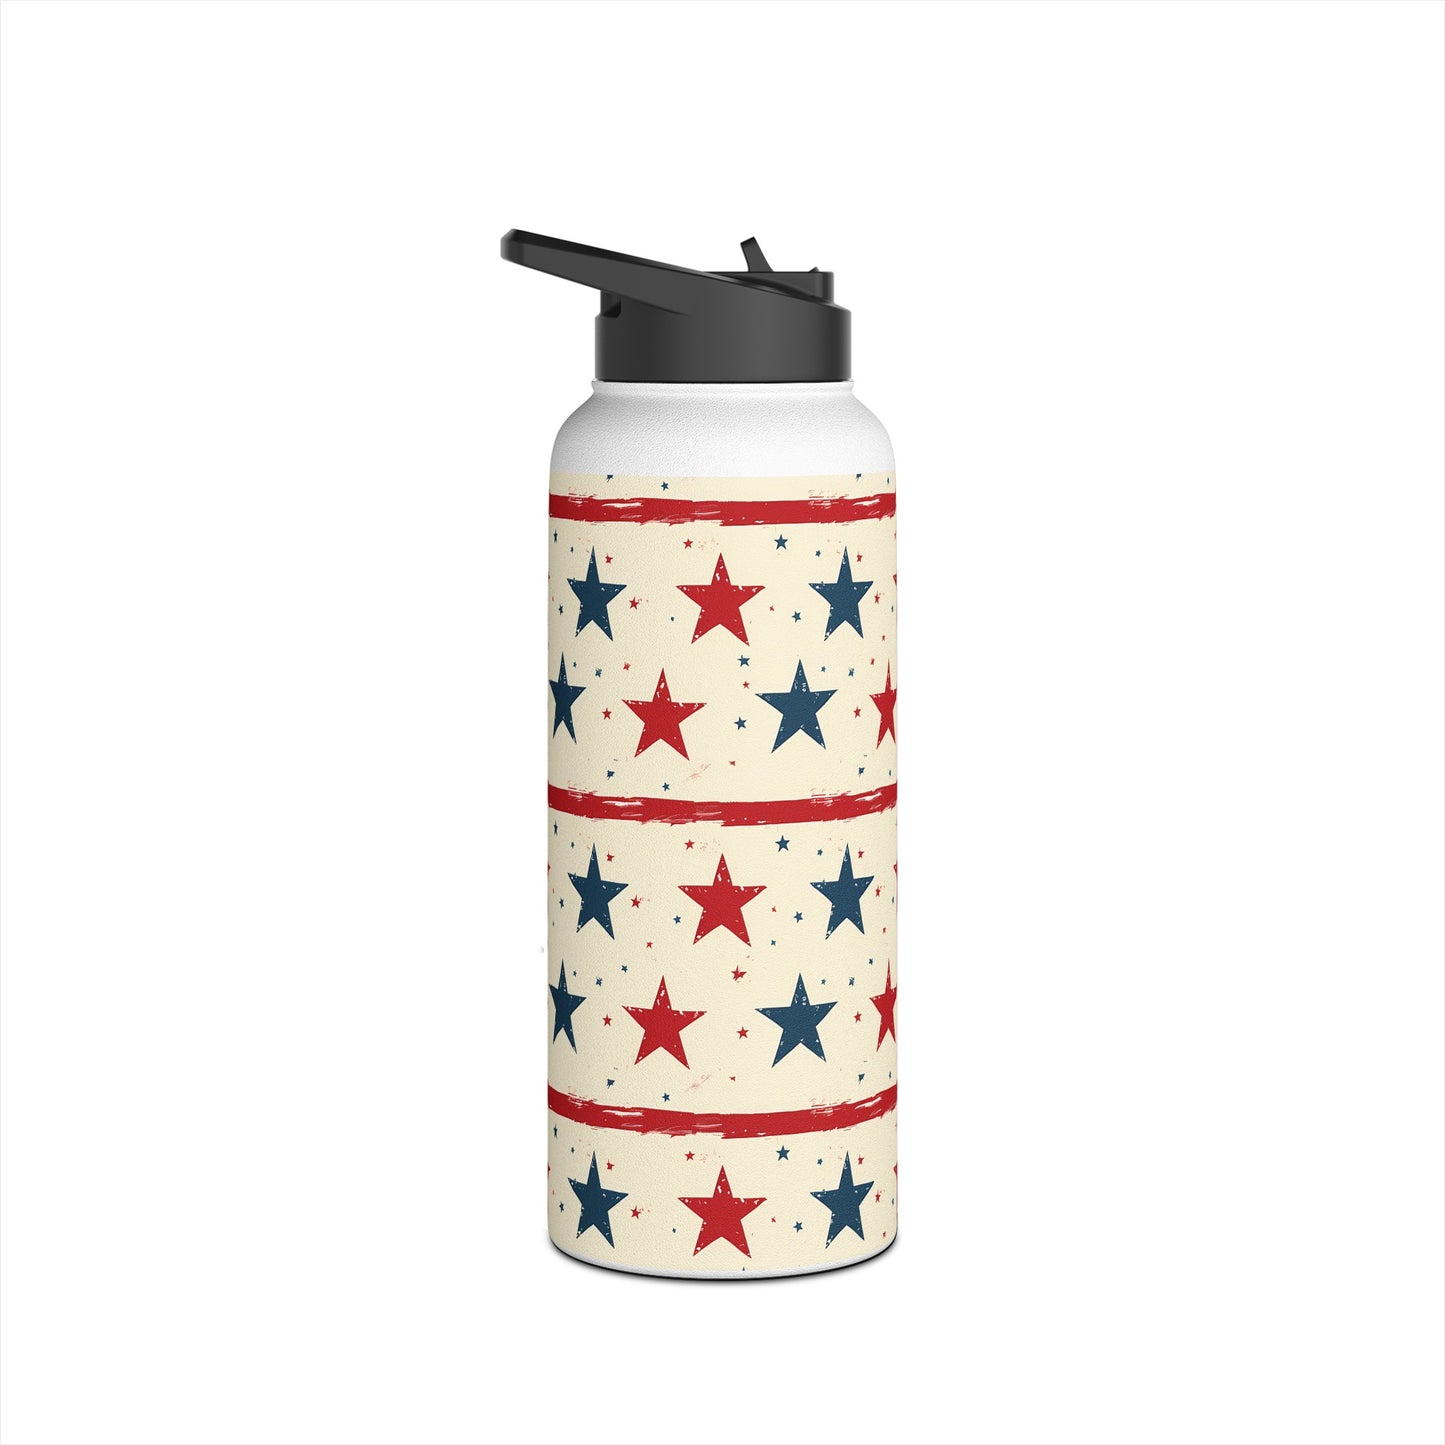 Stainless Steel Water Bottle Thermos, 32oz, Stars & Stripes - Double Wall Insulation Keeps Drinks Hot or Cold